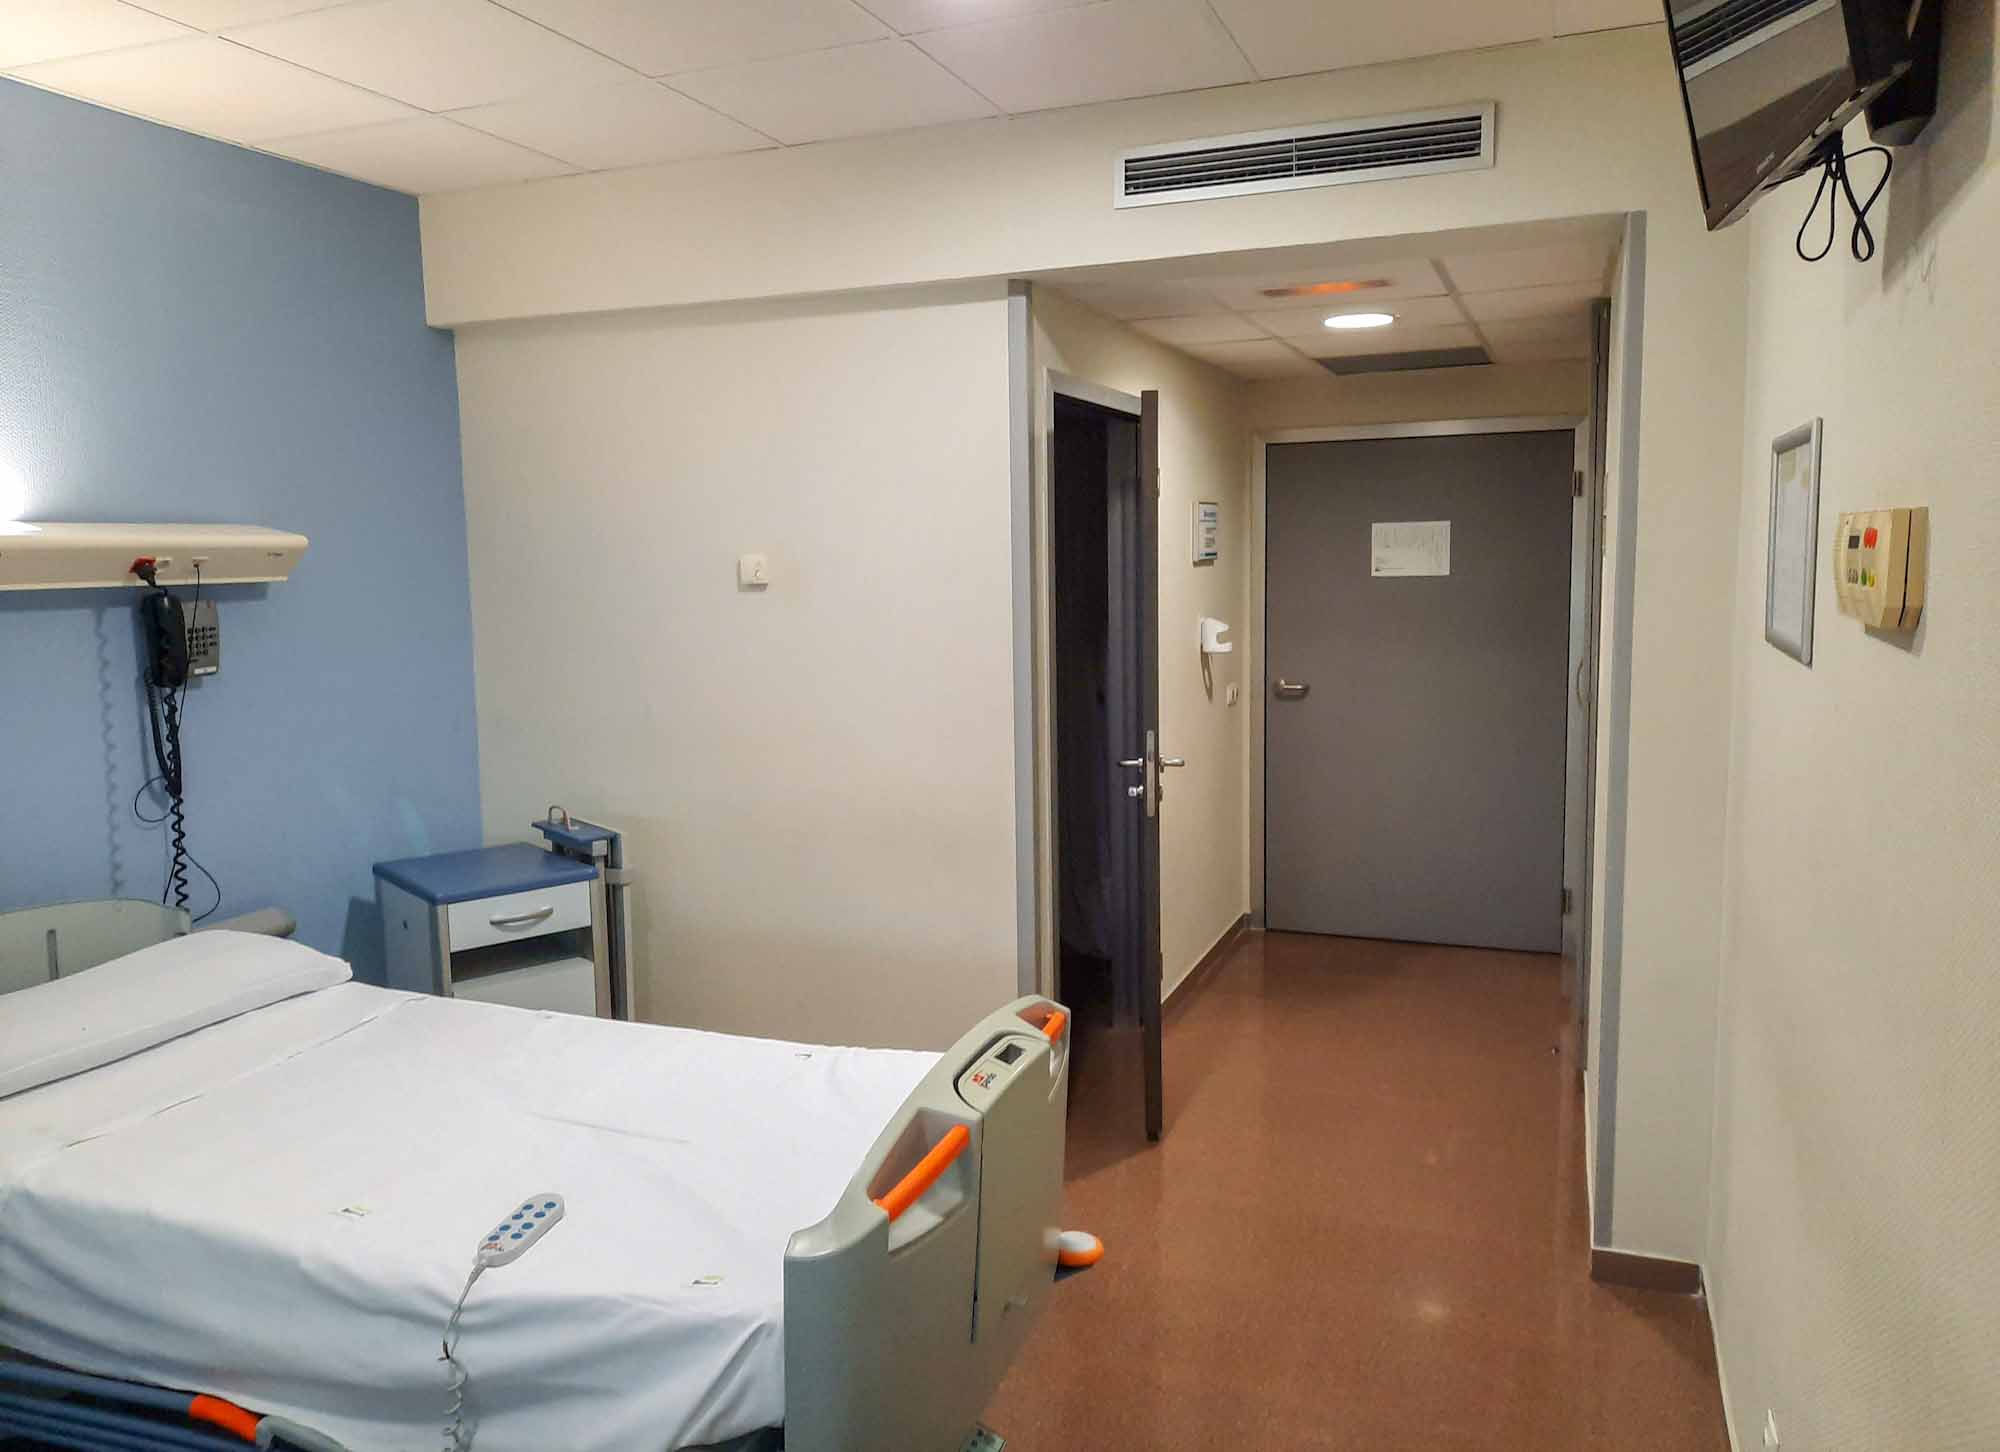 Inside a private room for a patient in a Spanish hospital